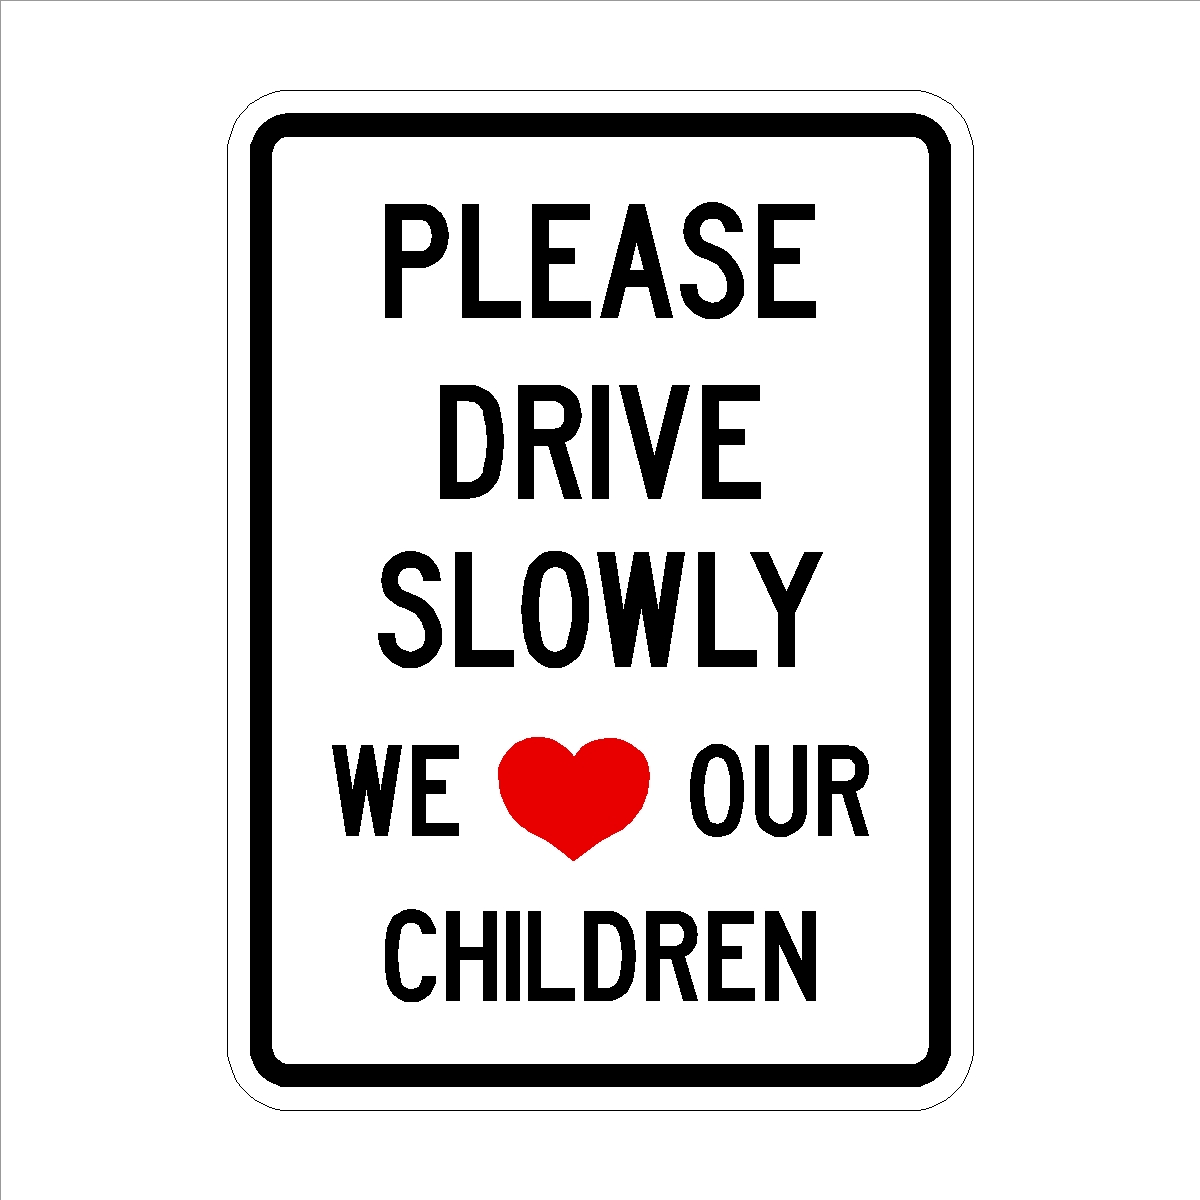 Please Drive Slowly We Love Our Children Sign 18" x 24" High Intensity Prismatic 